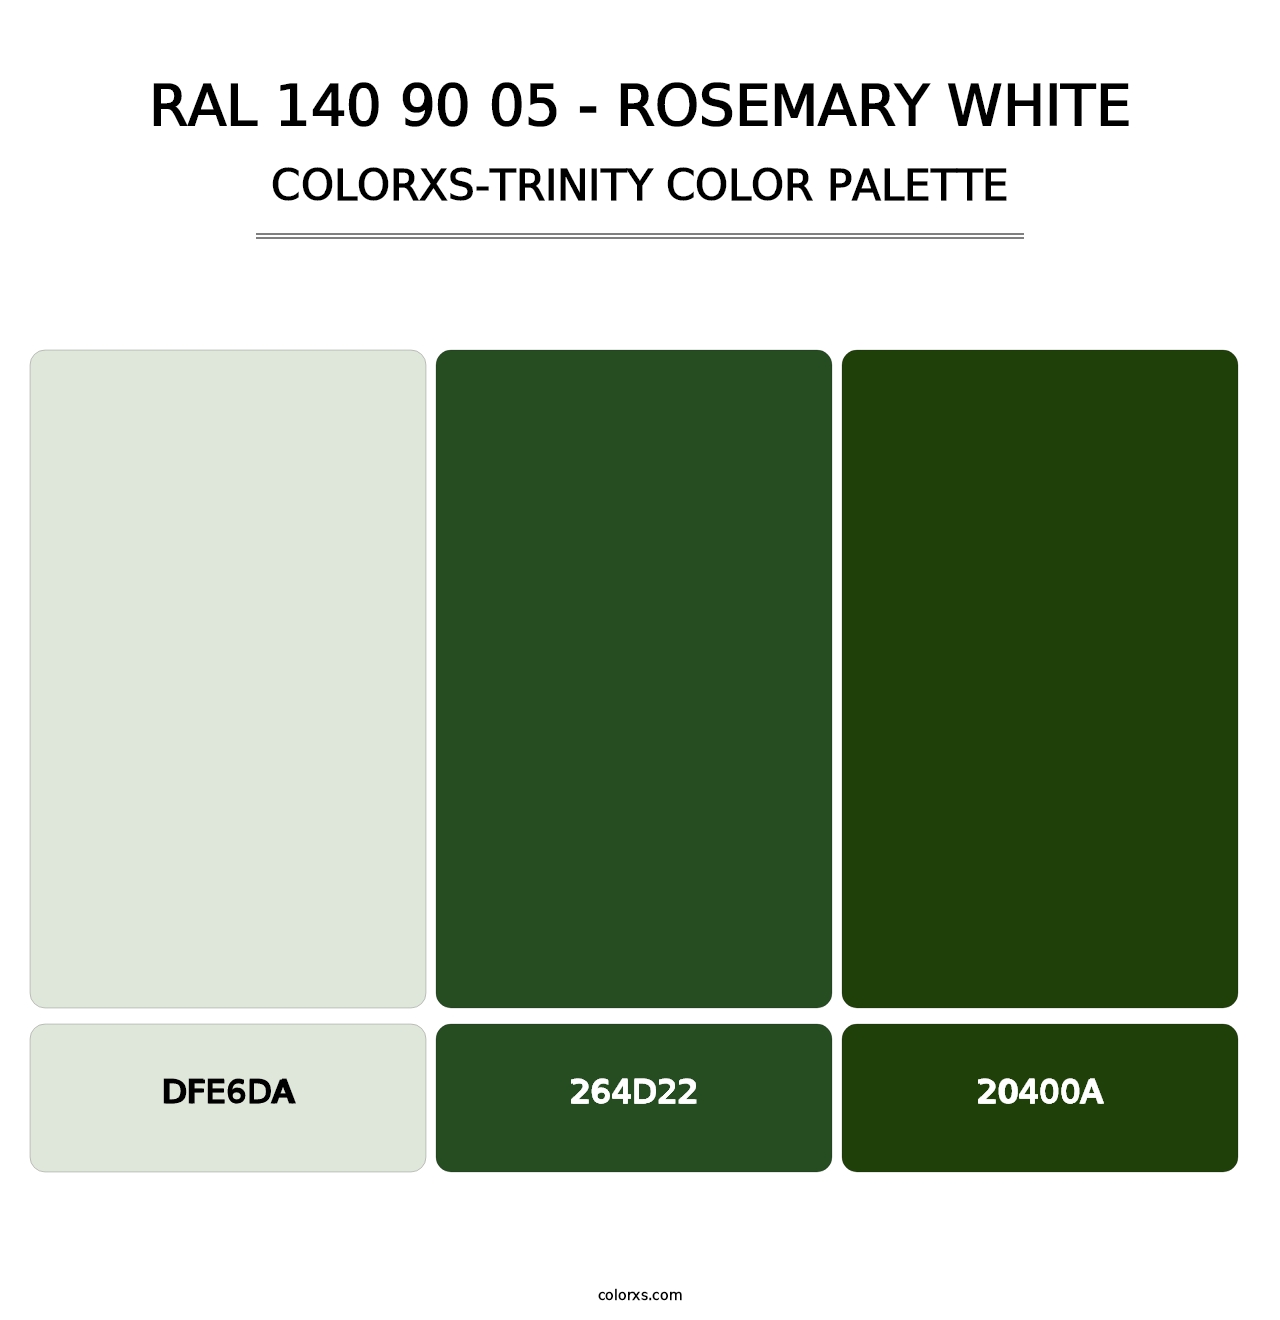 RAL 140 90 05 - Rosemary White - Colorxs Trinity Palette